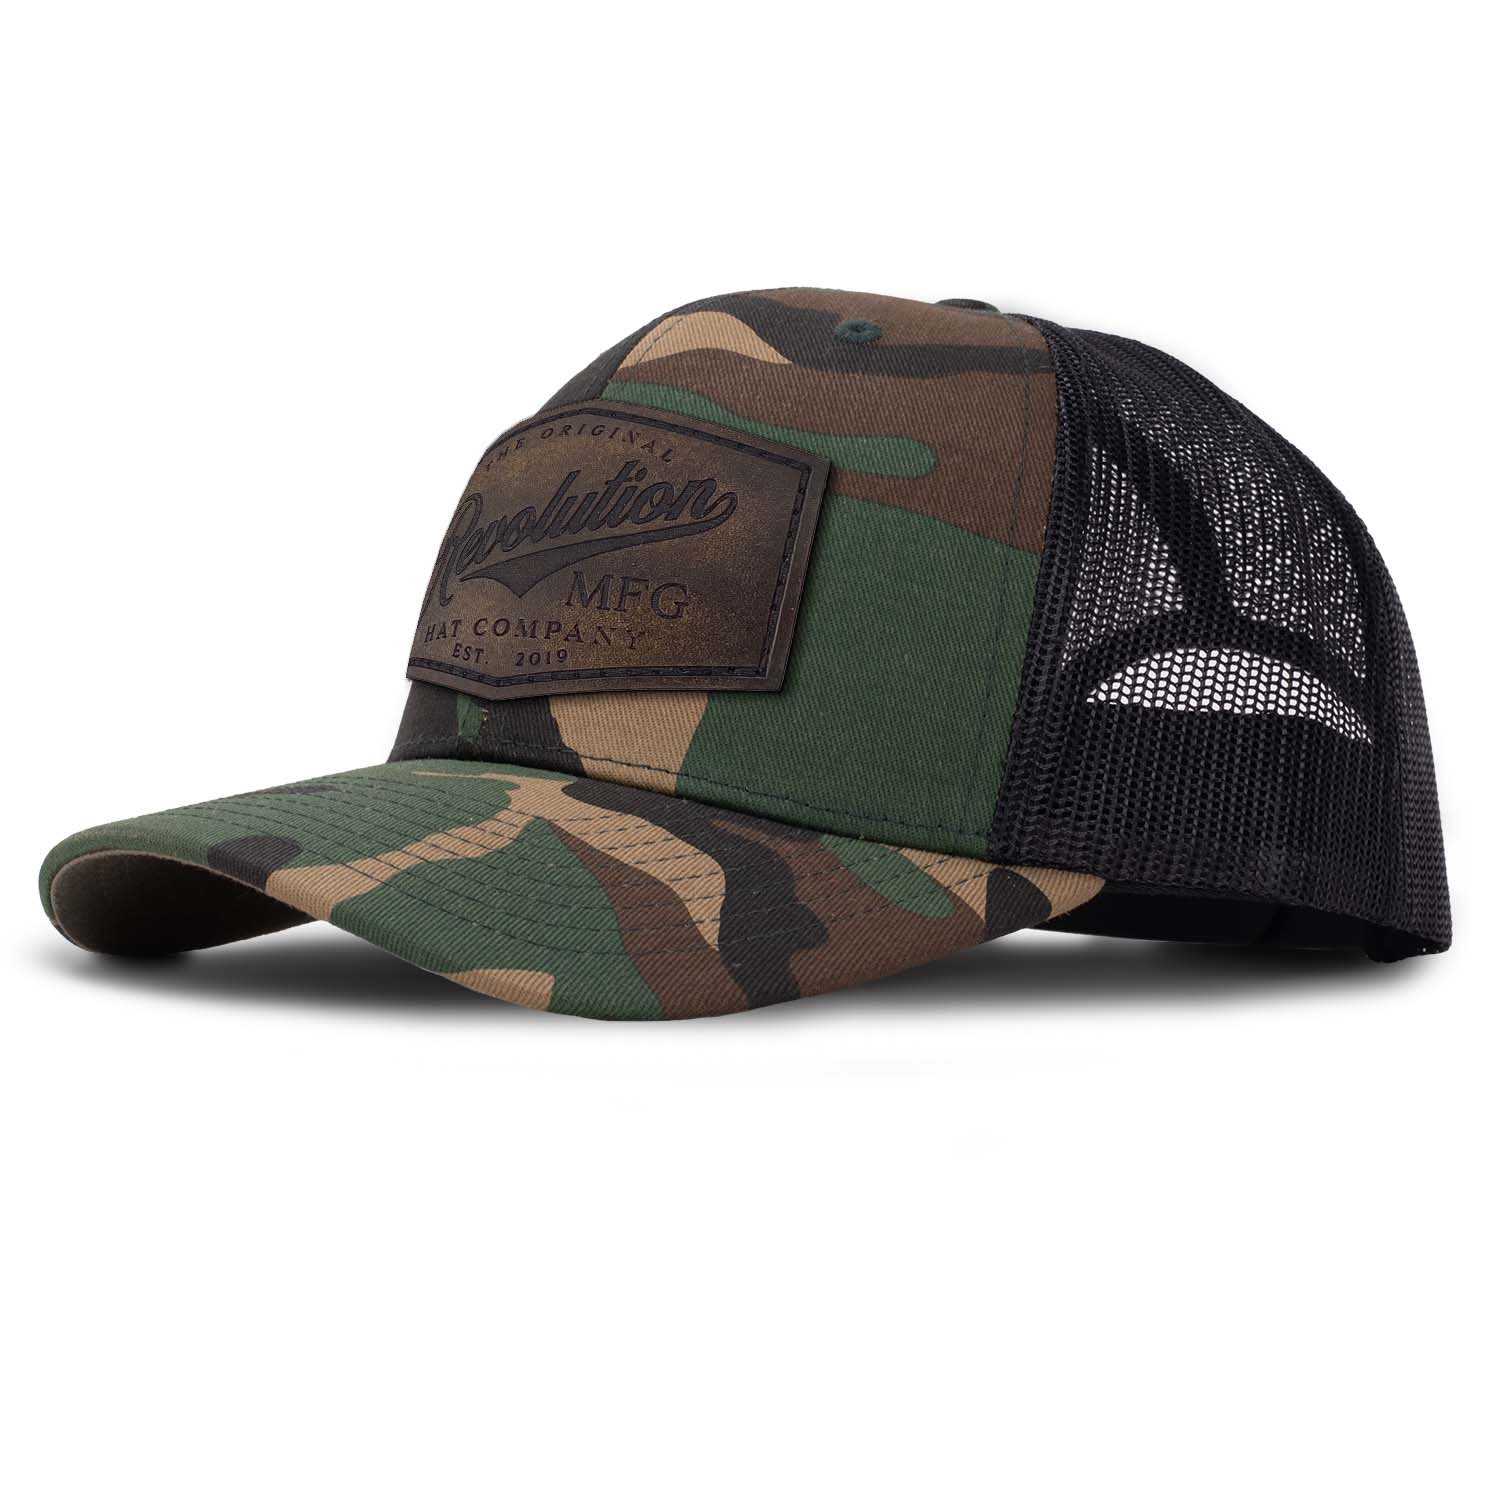 Revolution Mfg Hat Co full grain leather patch on a classic woodland camo trucker hat with black mesh